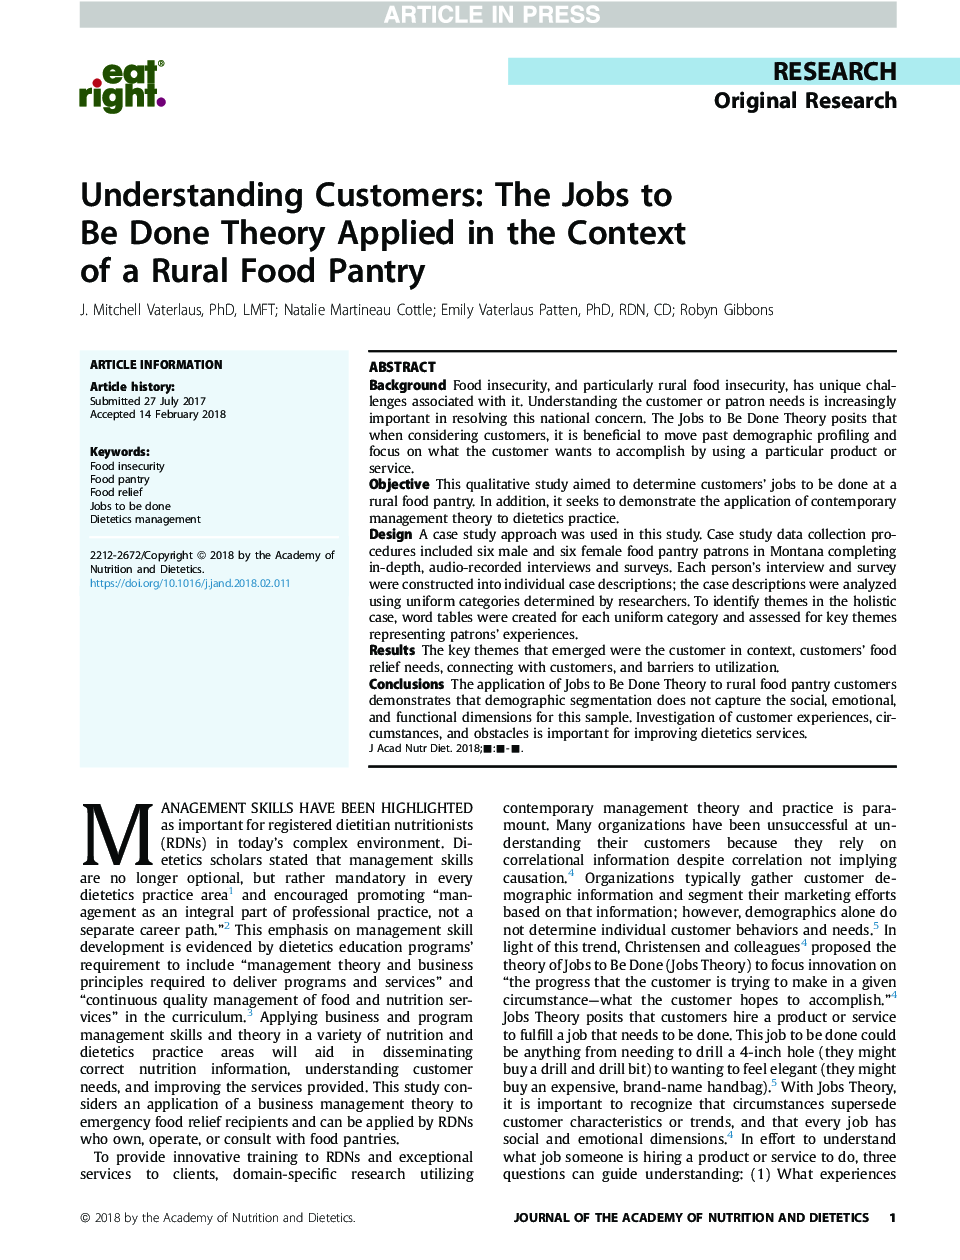 Understanding Customers: The Jobs to Be Done Theory Applied in the Context of a Rural Food Pantry